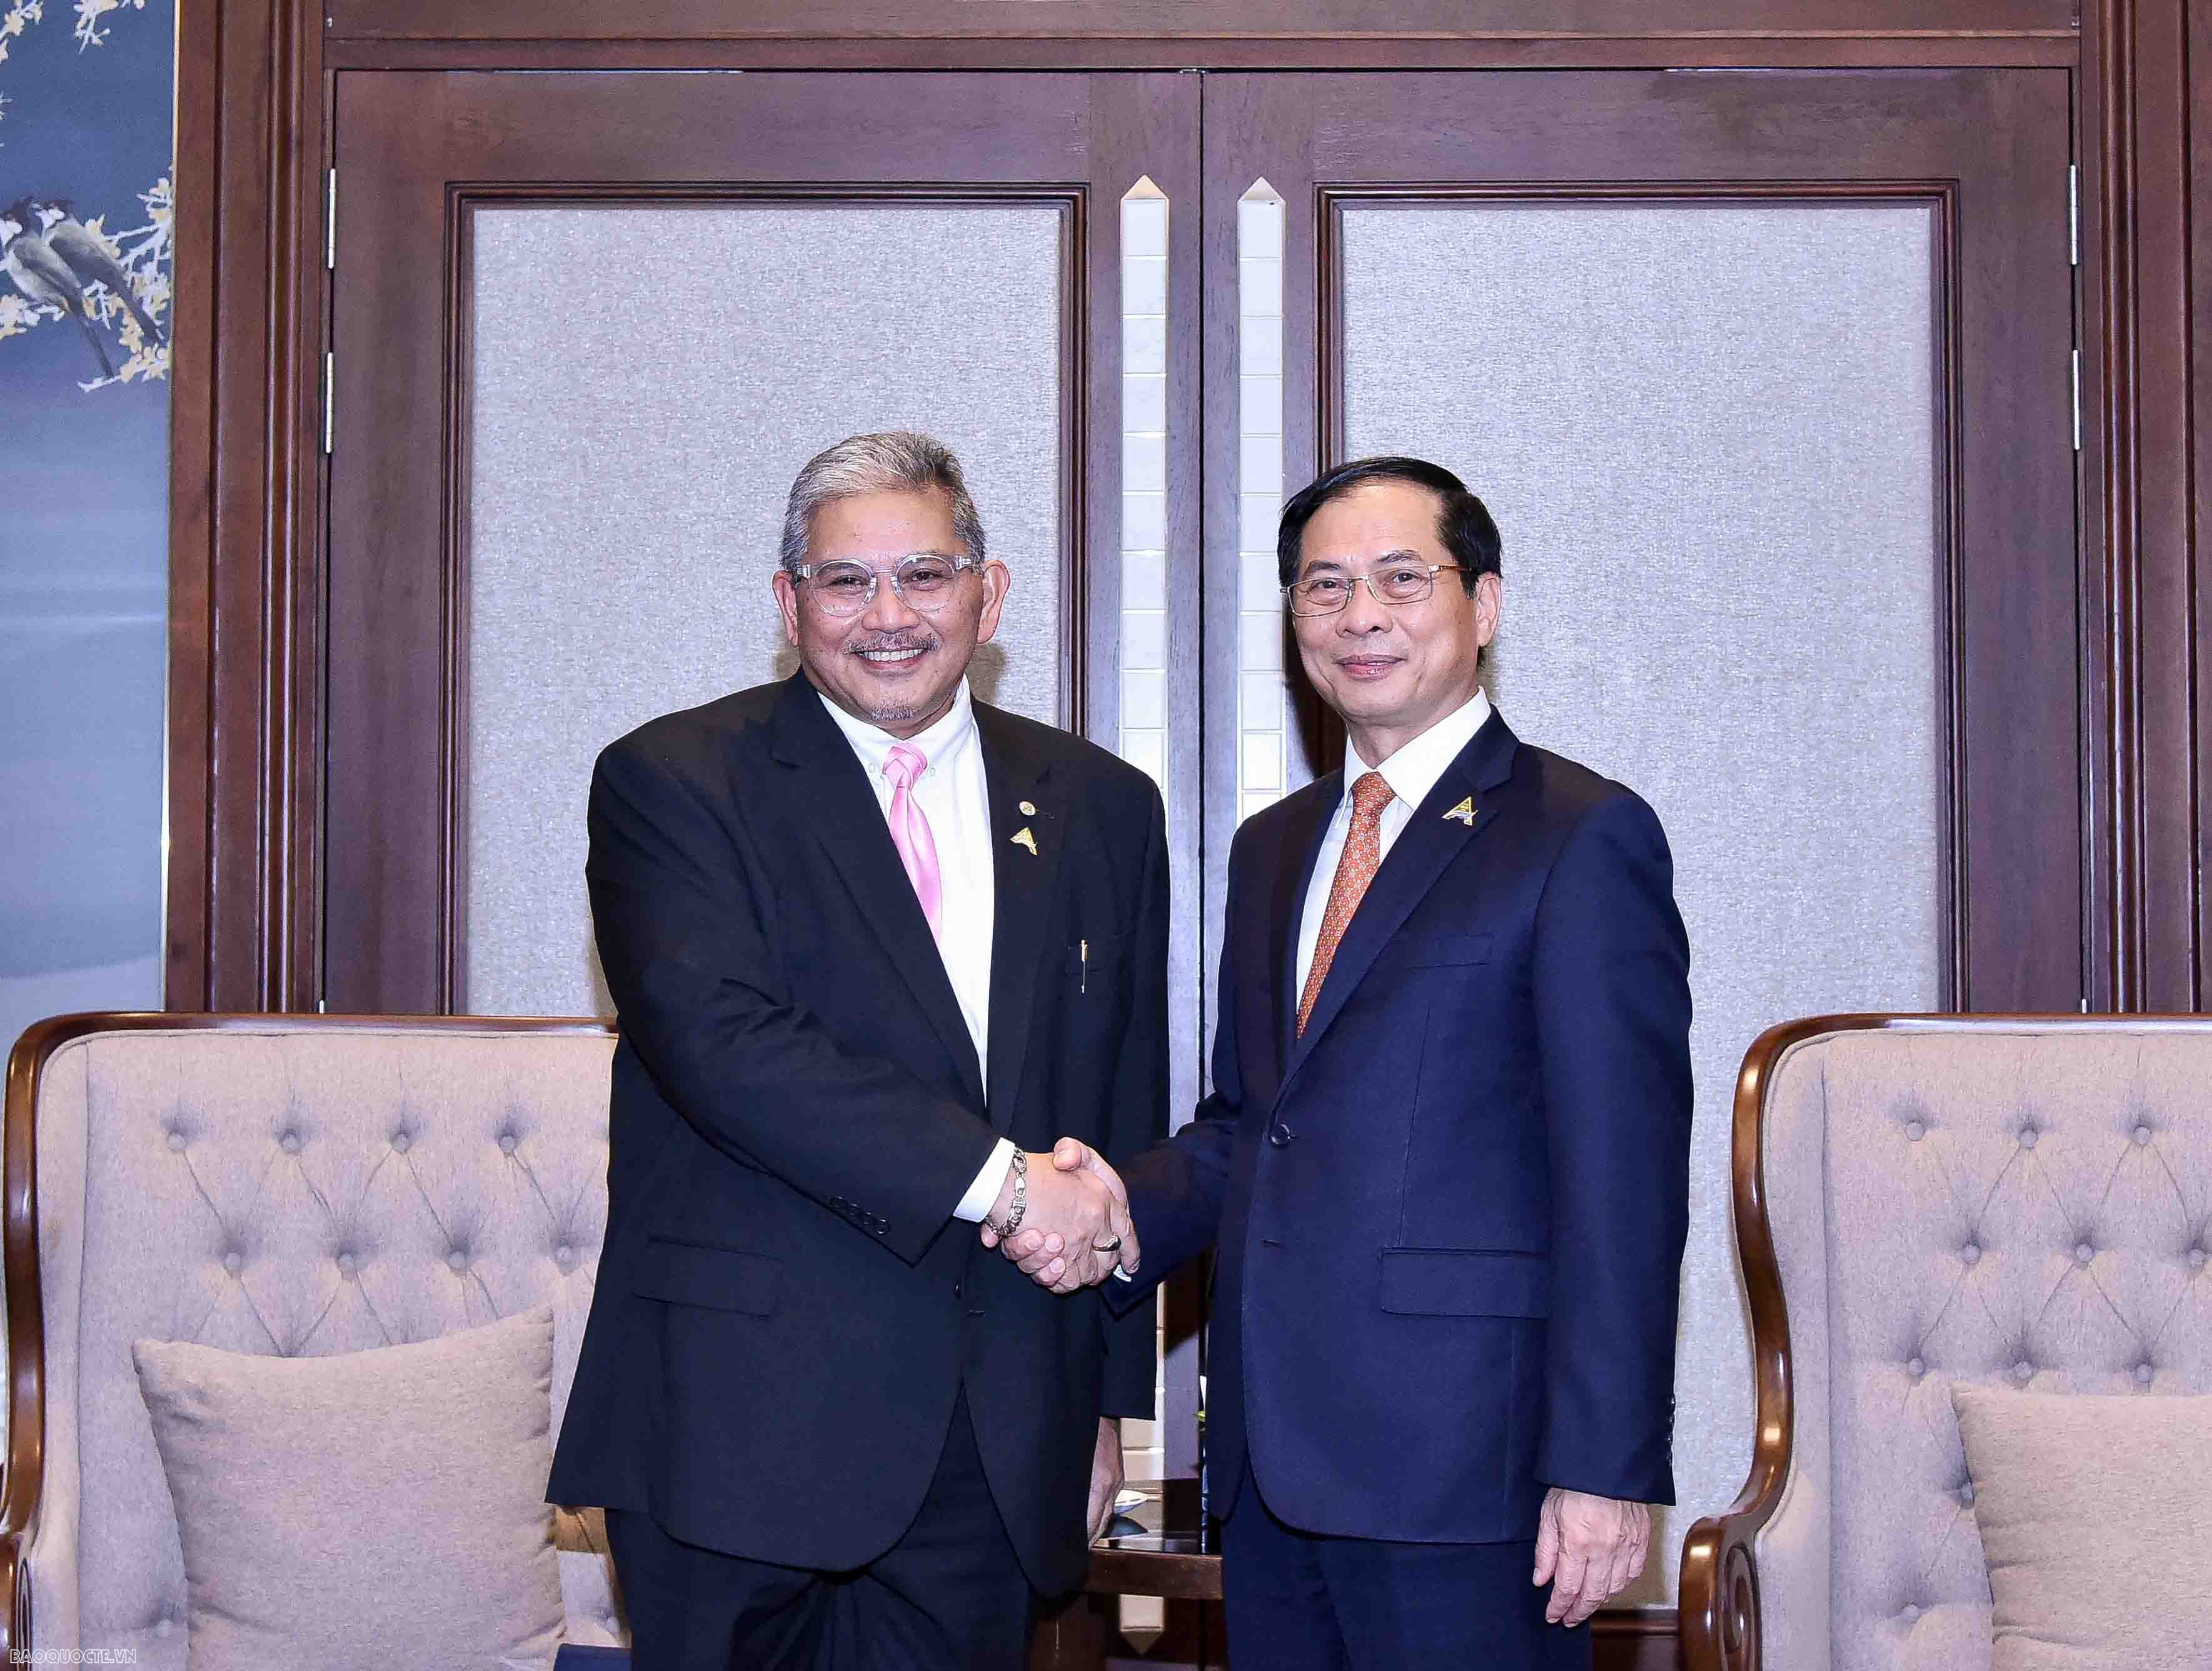 Vietnam, Brunei  agree to deepen bilateral cooperation: Foreign Minister